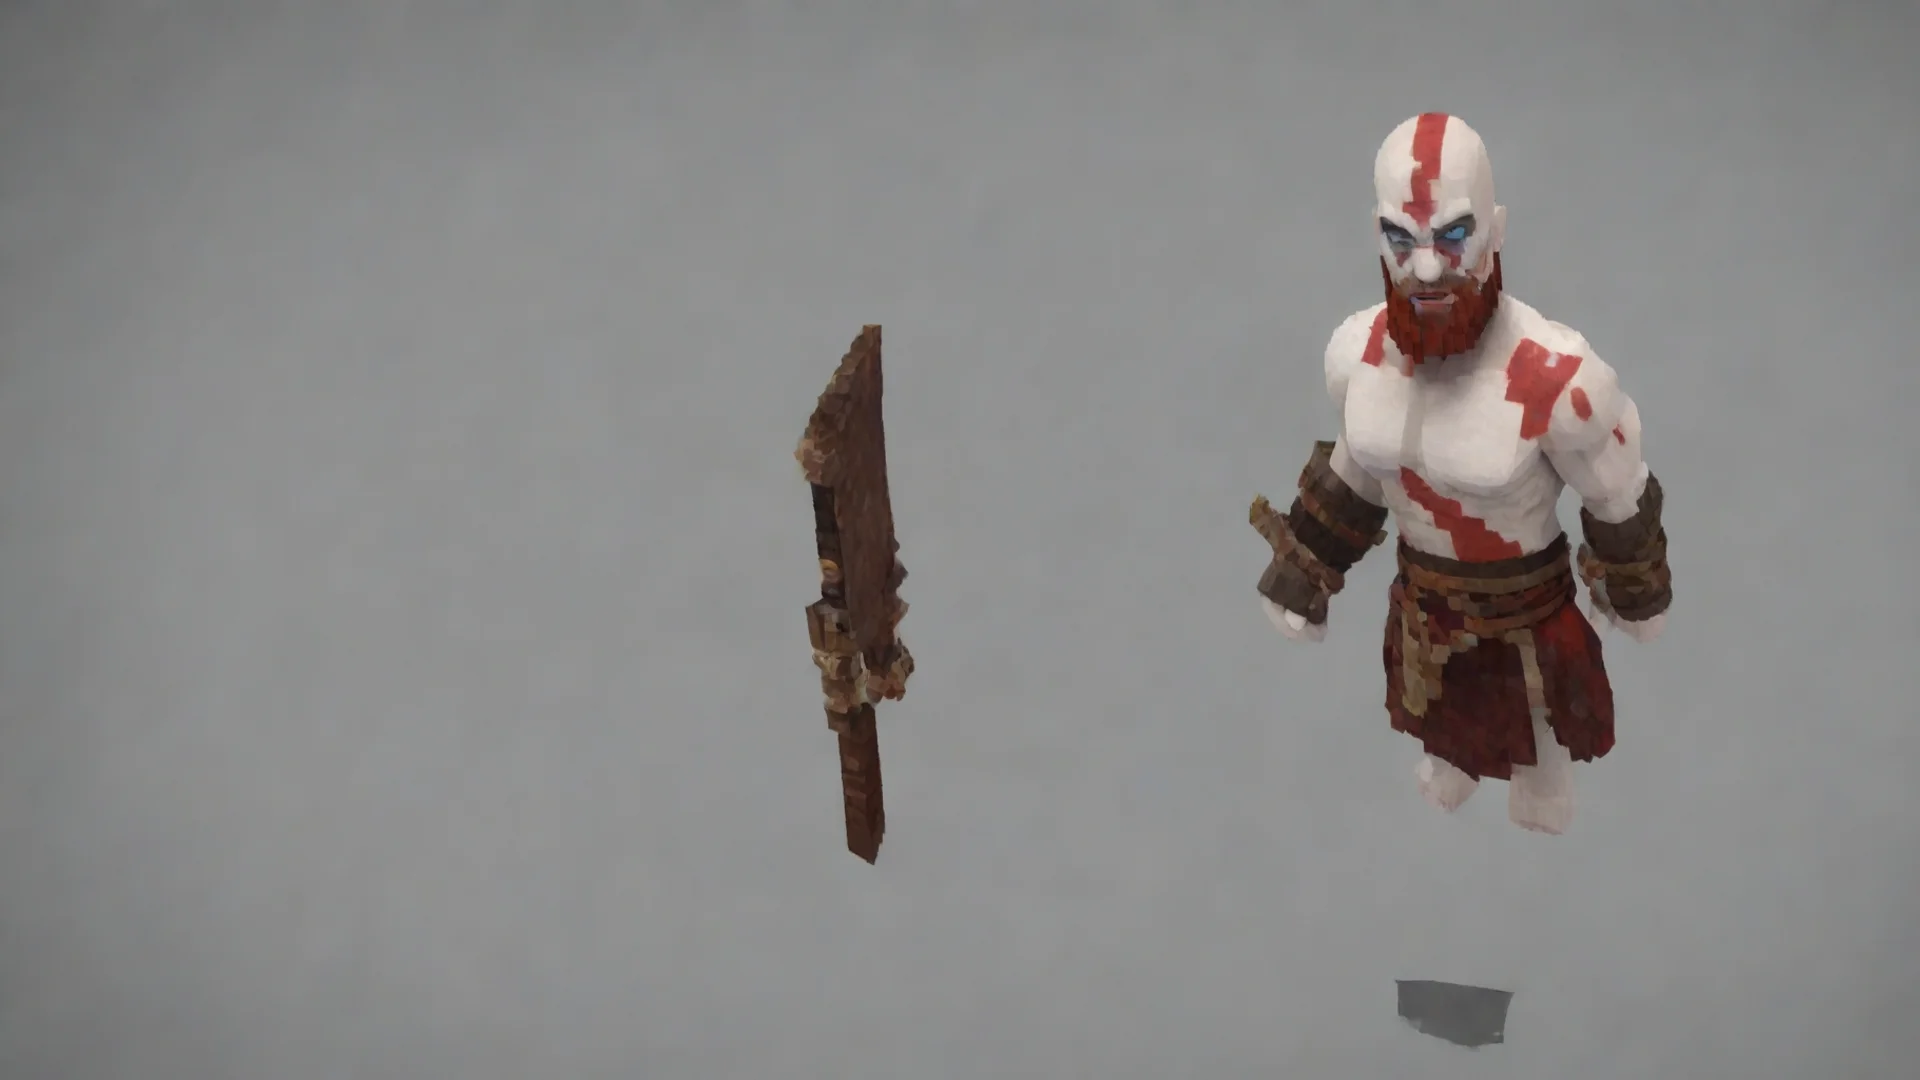 aiamazing kratos minecraft awesome portrait 2 hdwidescreen